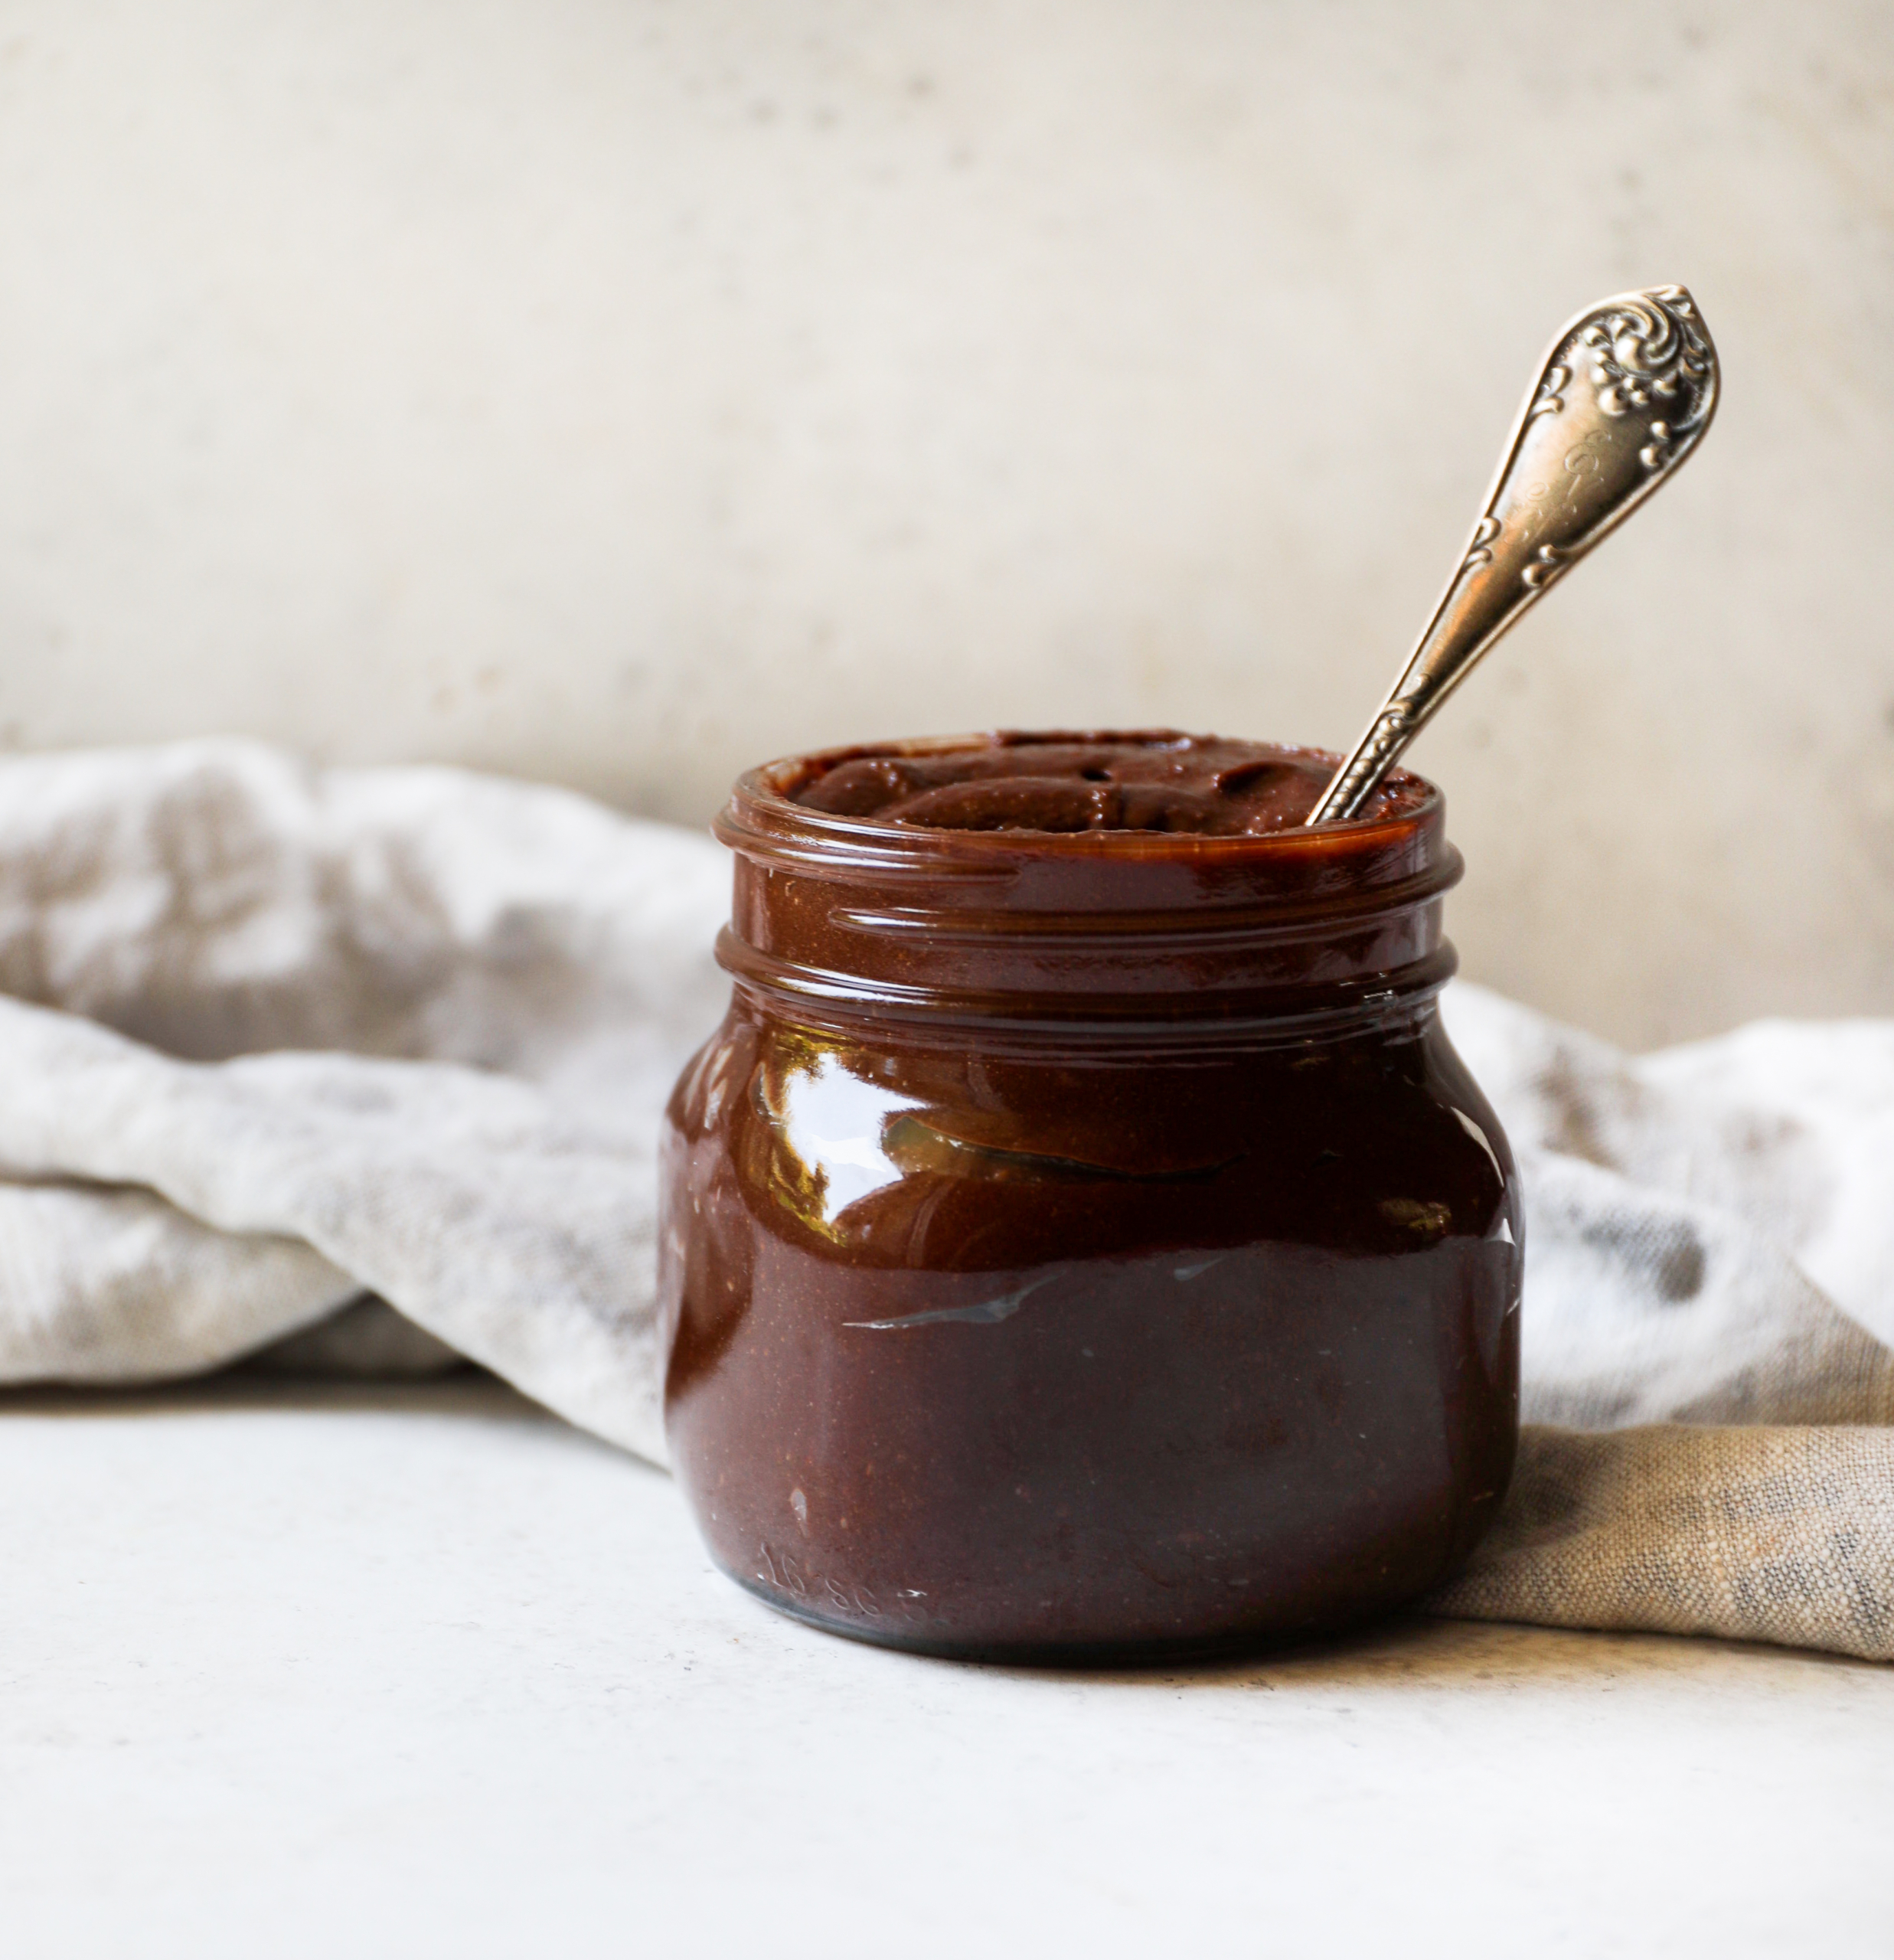 A glass jar set against a white background filled with homemade nutella and a spoon sticking out of it.